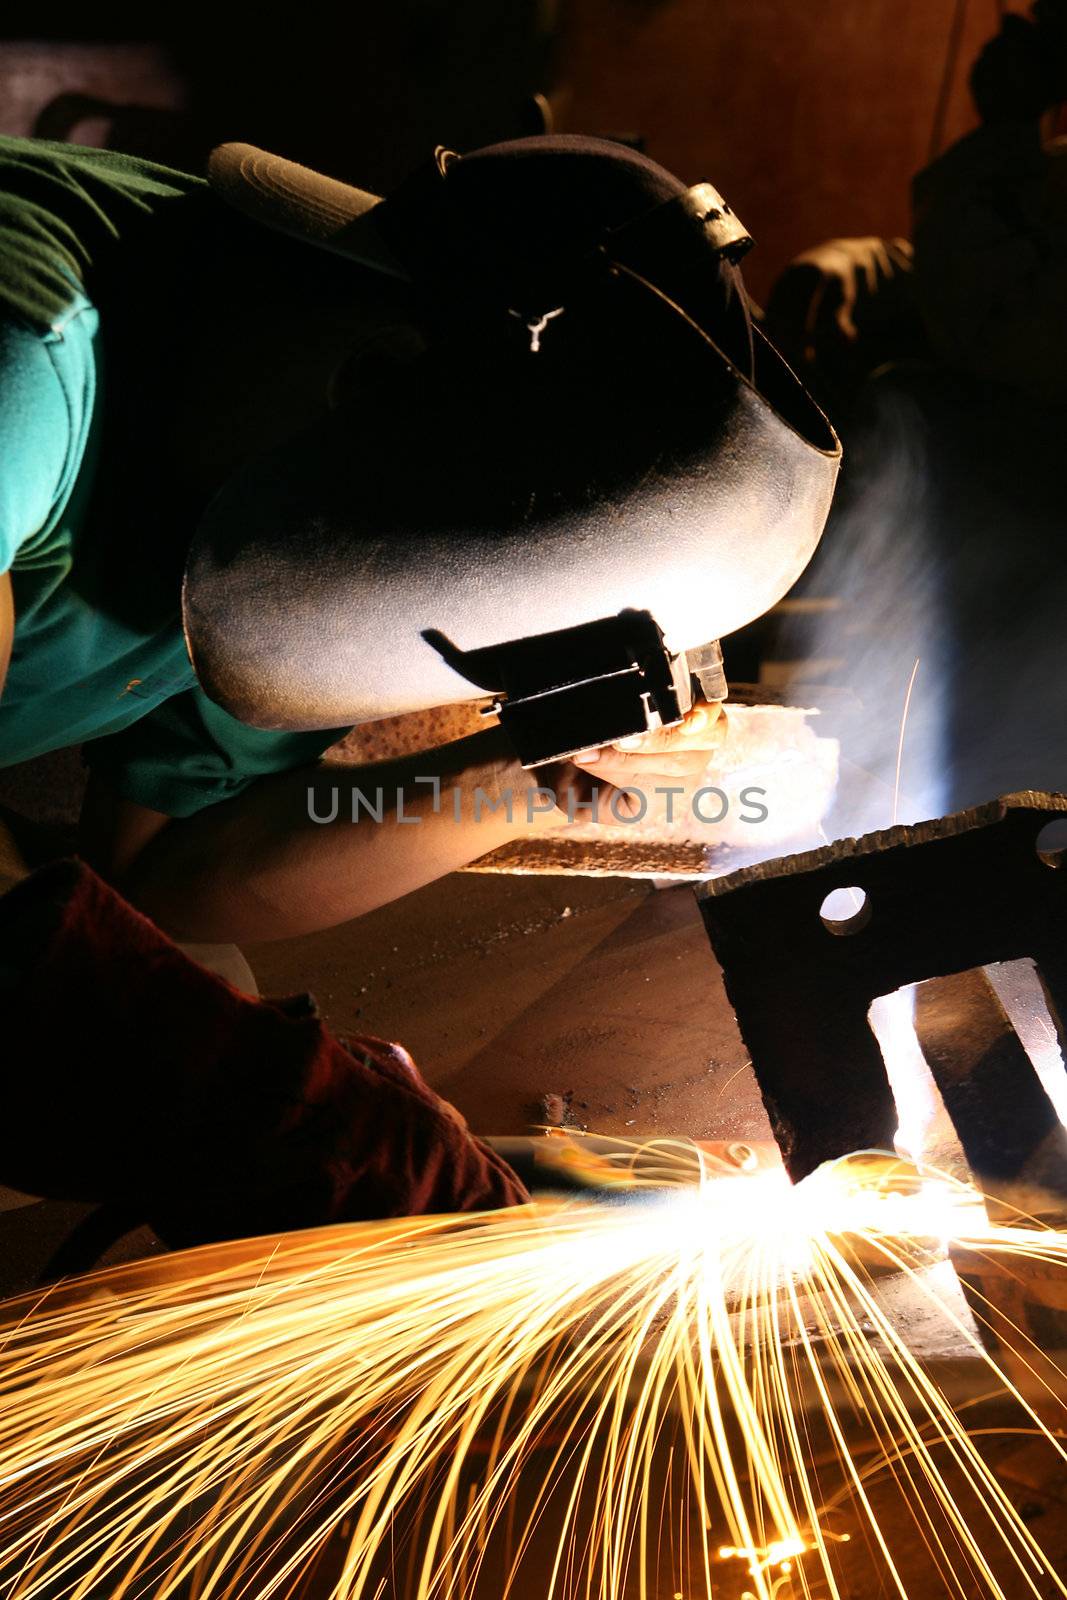 Welding by photosoup